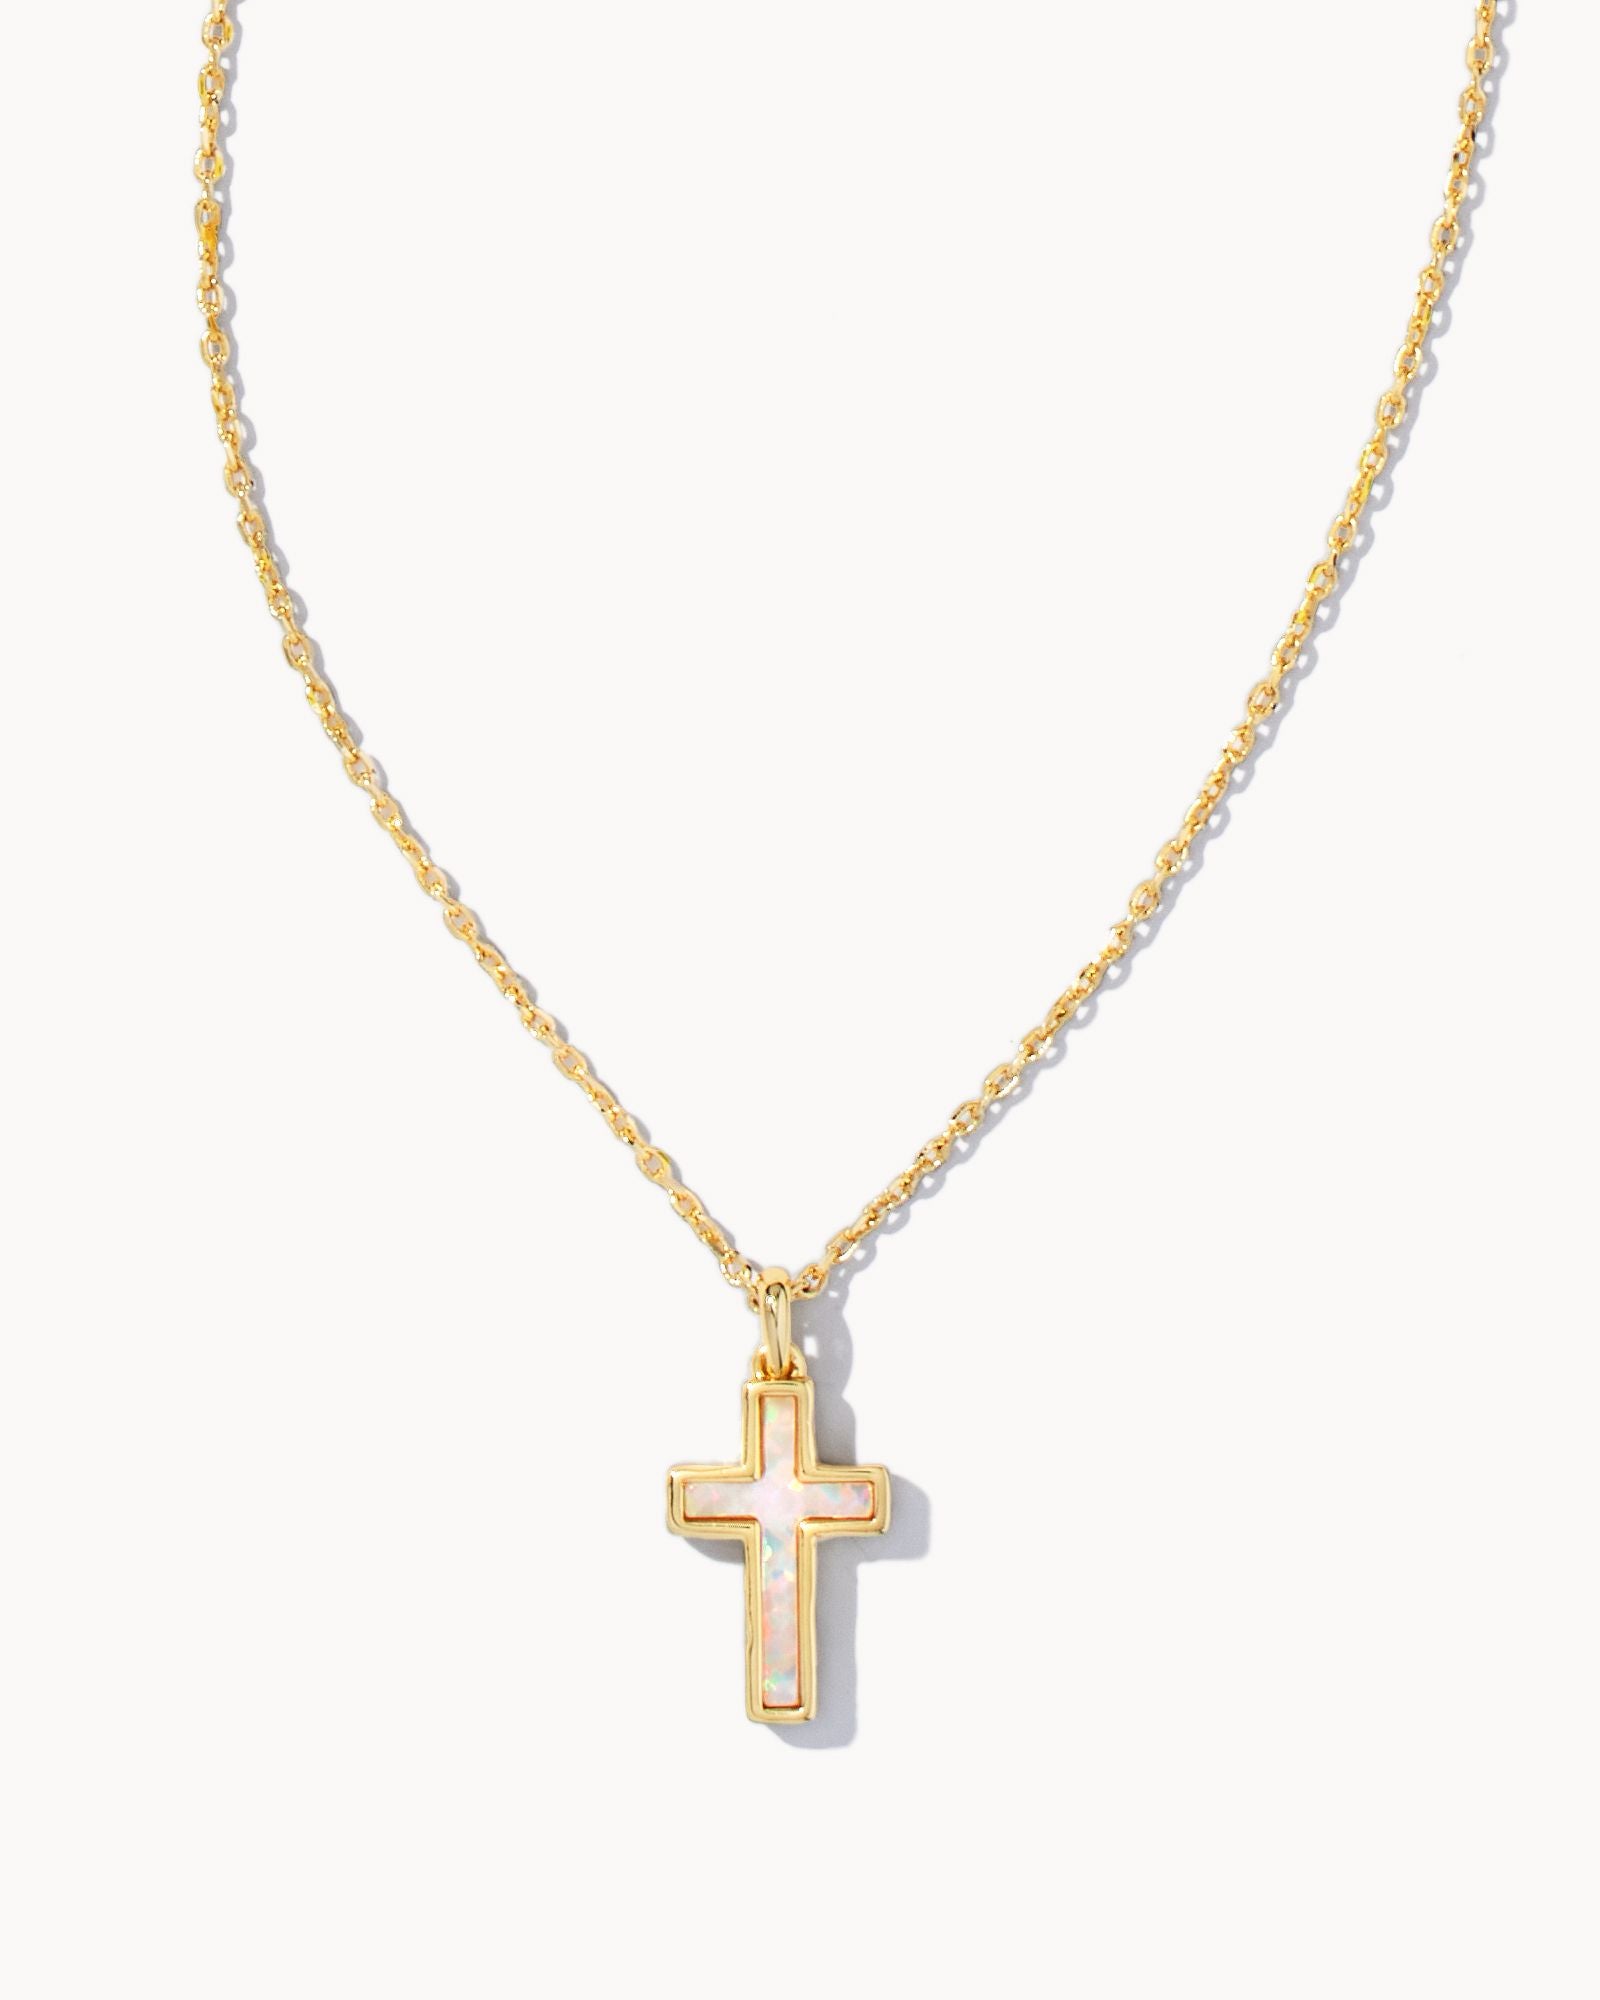 Cross Pendant Necklace White Opal Gold or Silver